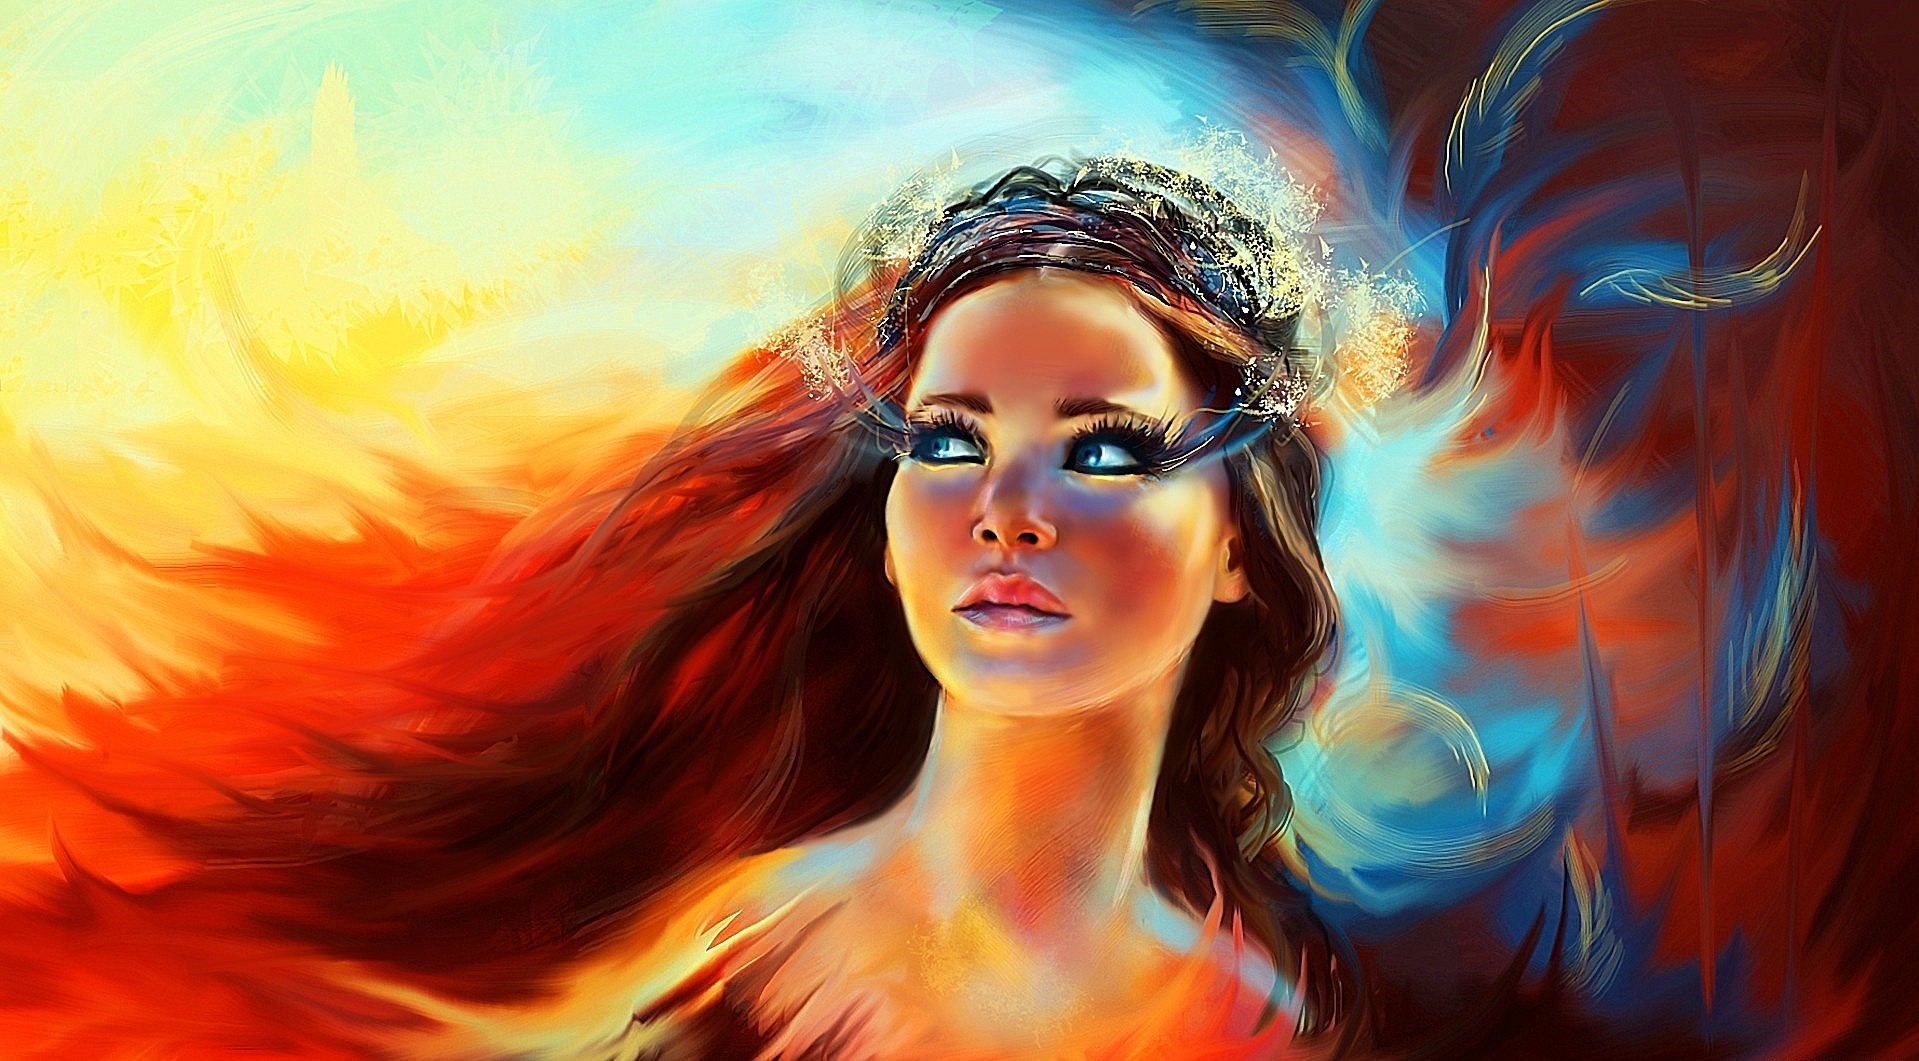 Women Artwork Movies Hunger Games The Hunger Games Jennifer Lawrence Fantasy Girl Colorful 1919x1061